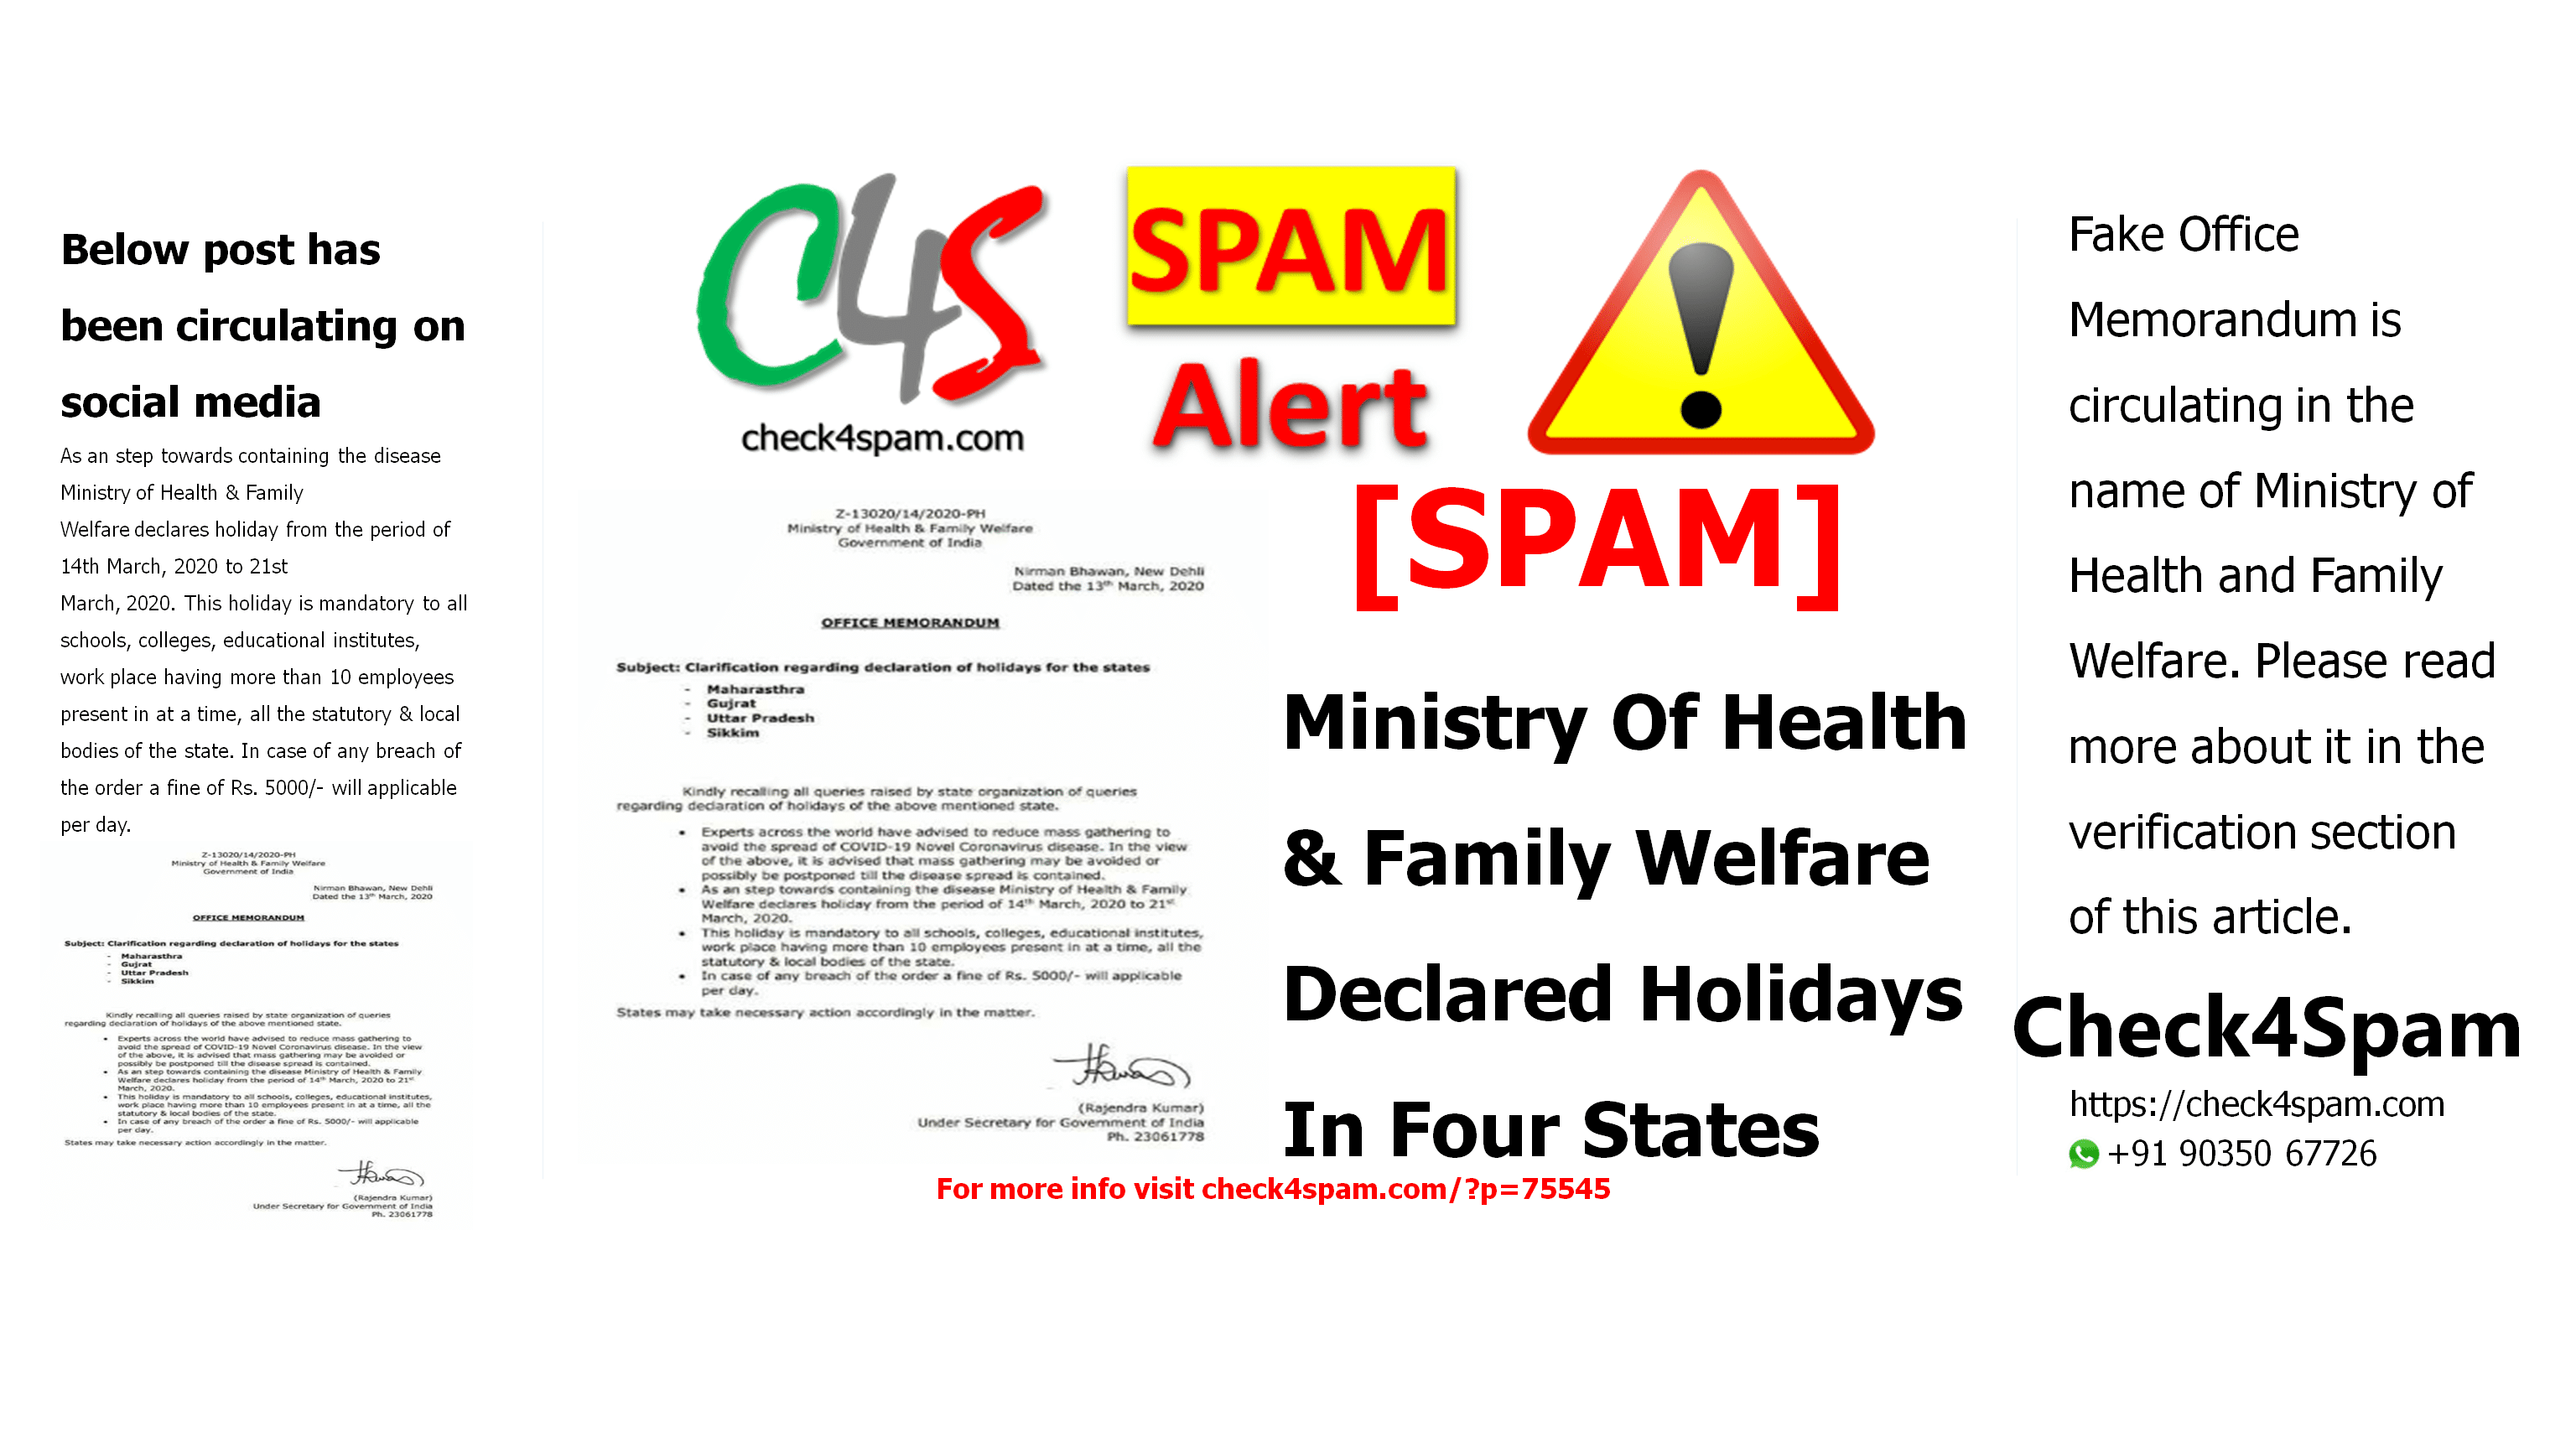 Ministry Of Health & Family Welfare Declared Holidays In Four States